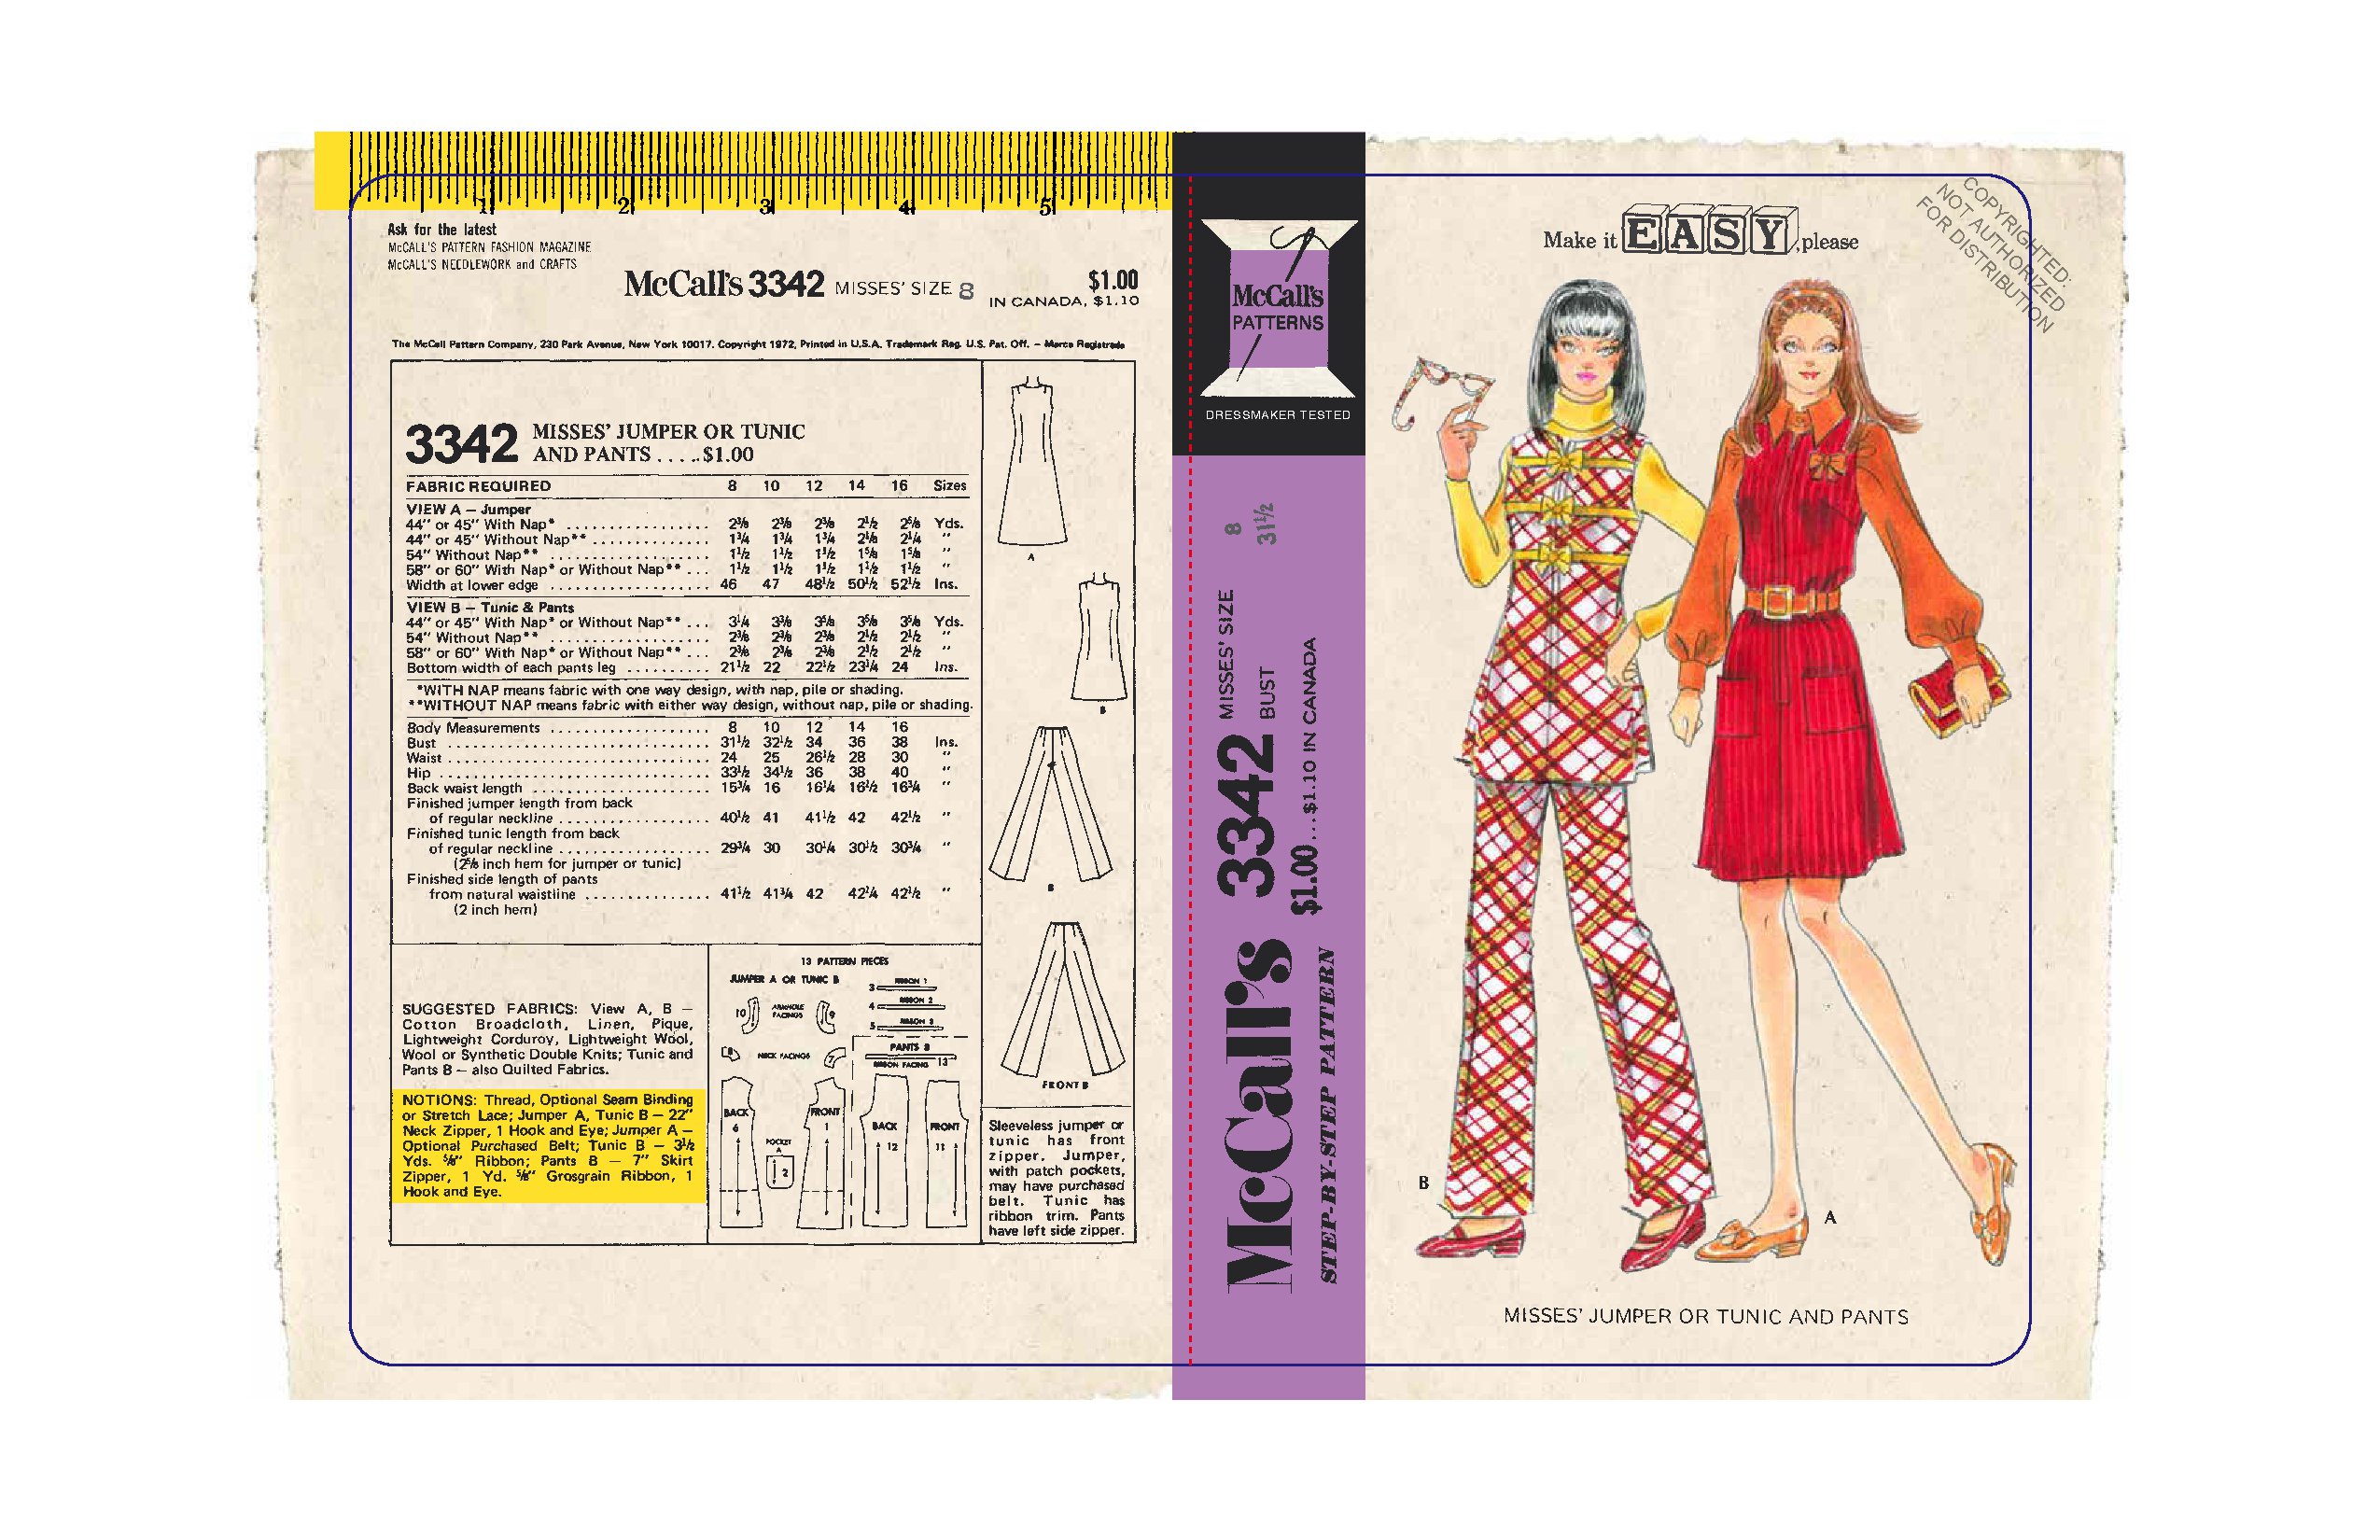 Vintage McCall's Patterns Notebook Collection (Sewing Journal, Vintage Sewing Patterns, Gifts for Mom)